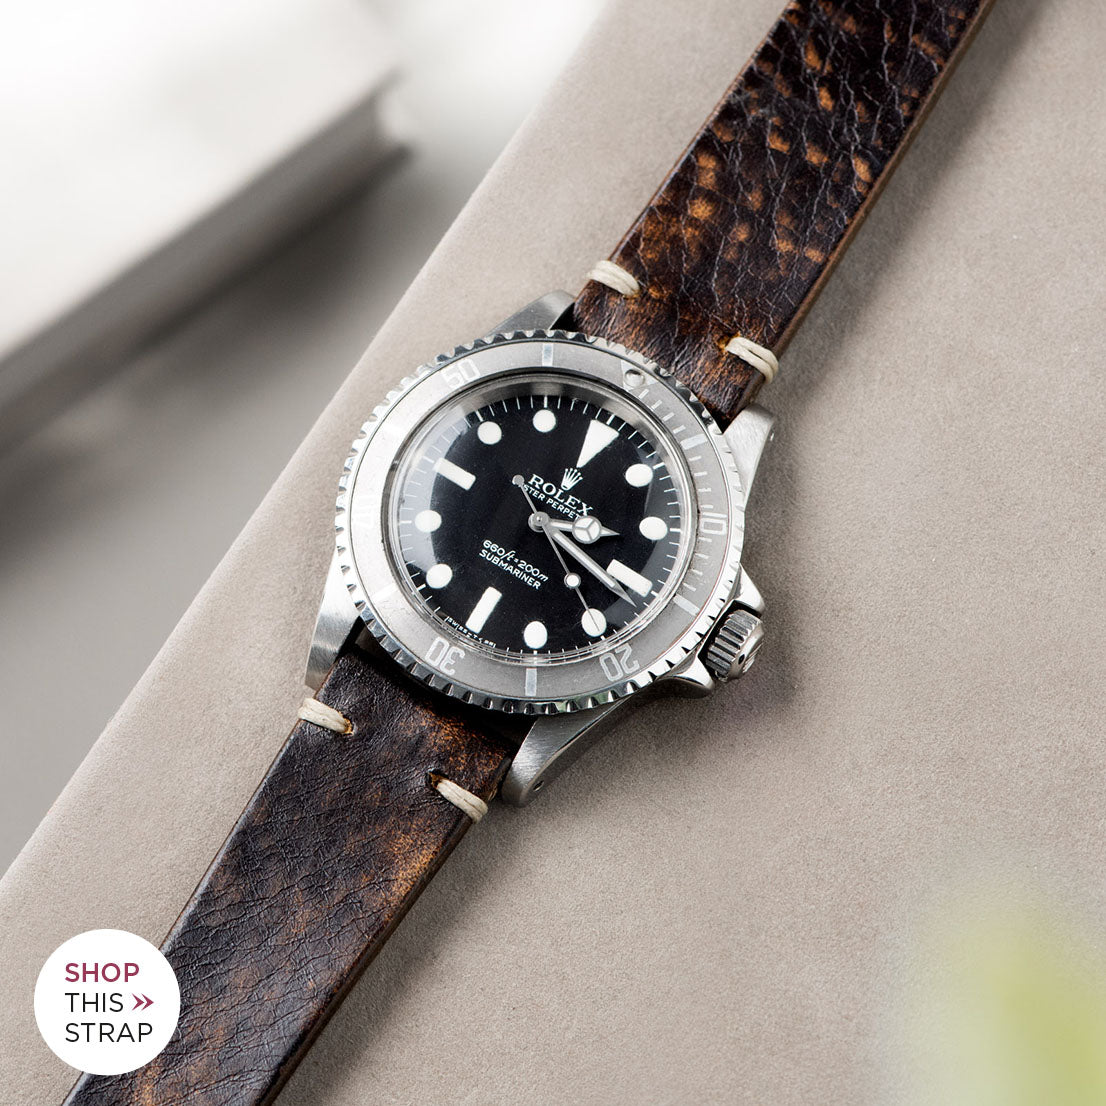 Bulang and Sons_Strap Guide_The Rolex 5513 Faded Maxi Submariner_Woodie Brown Leather Watch Strap